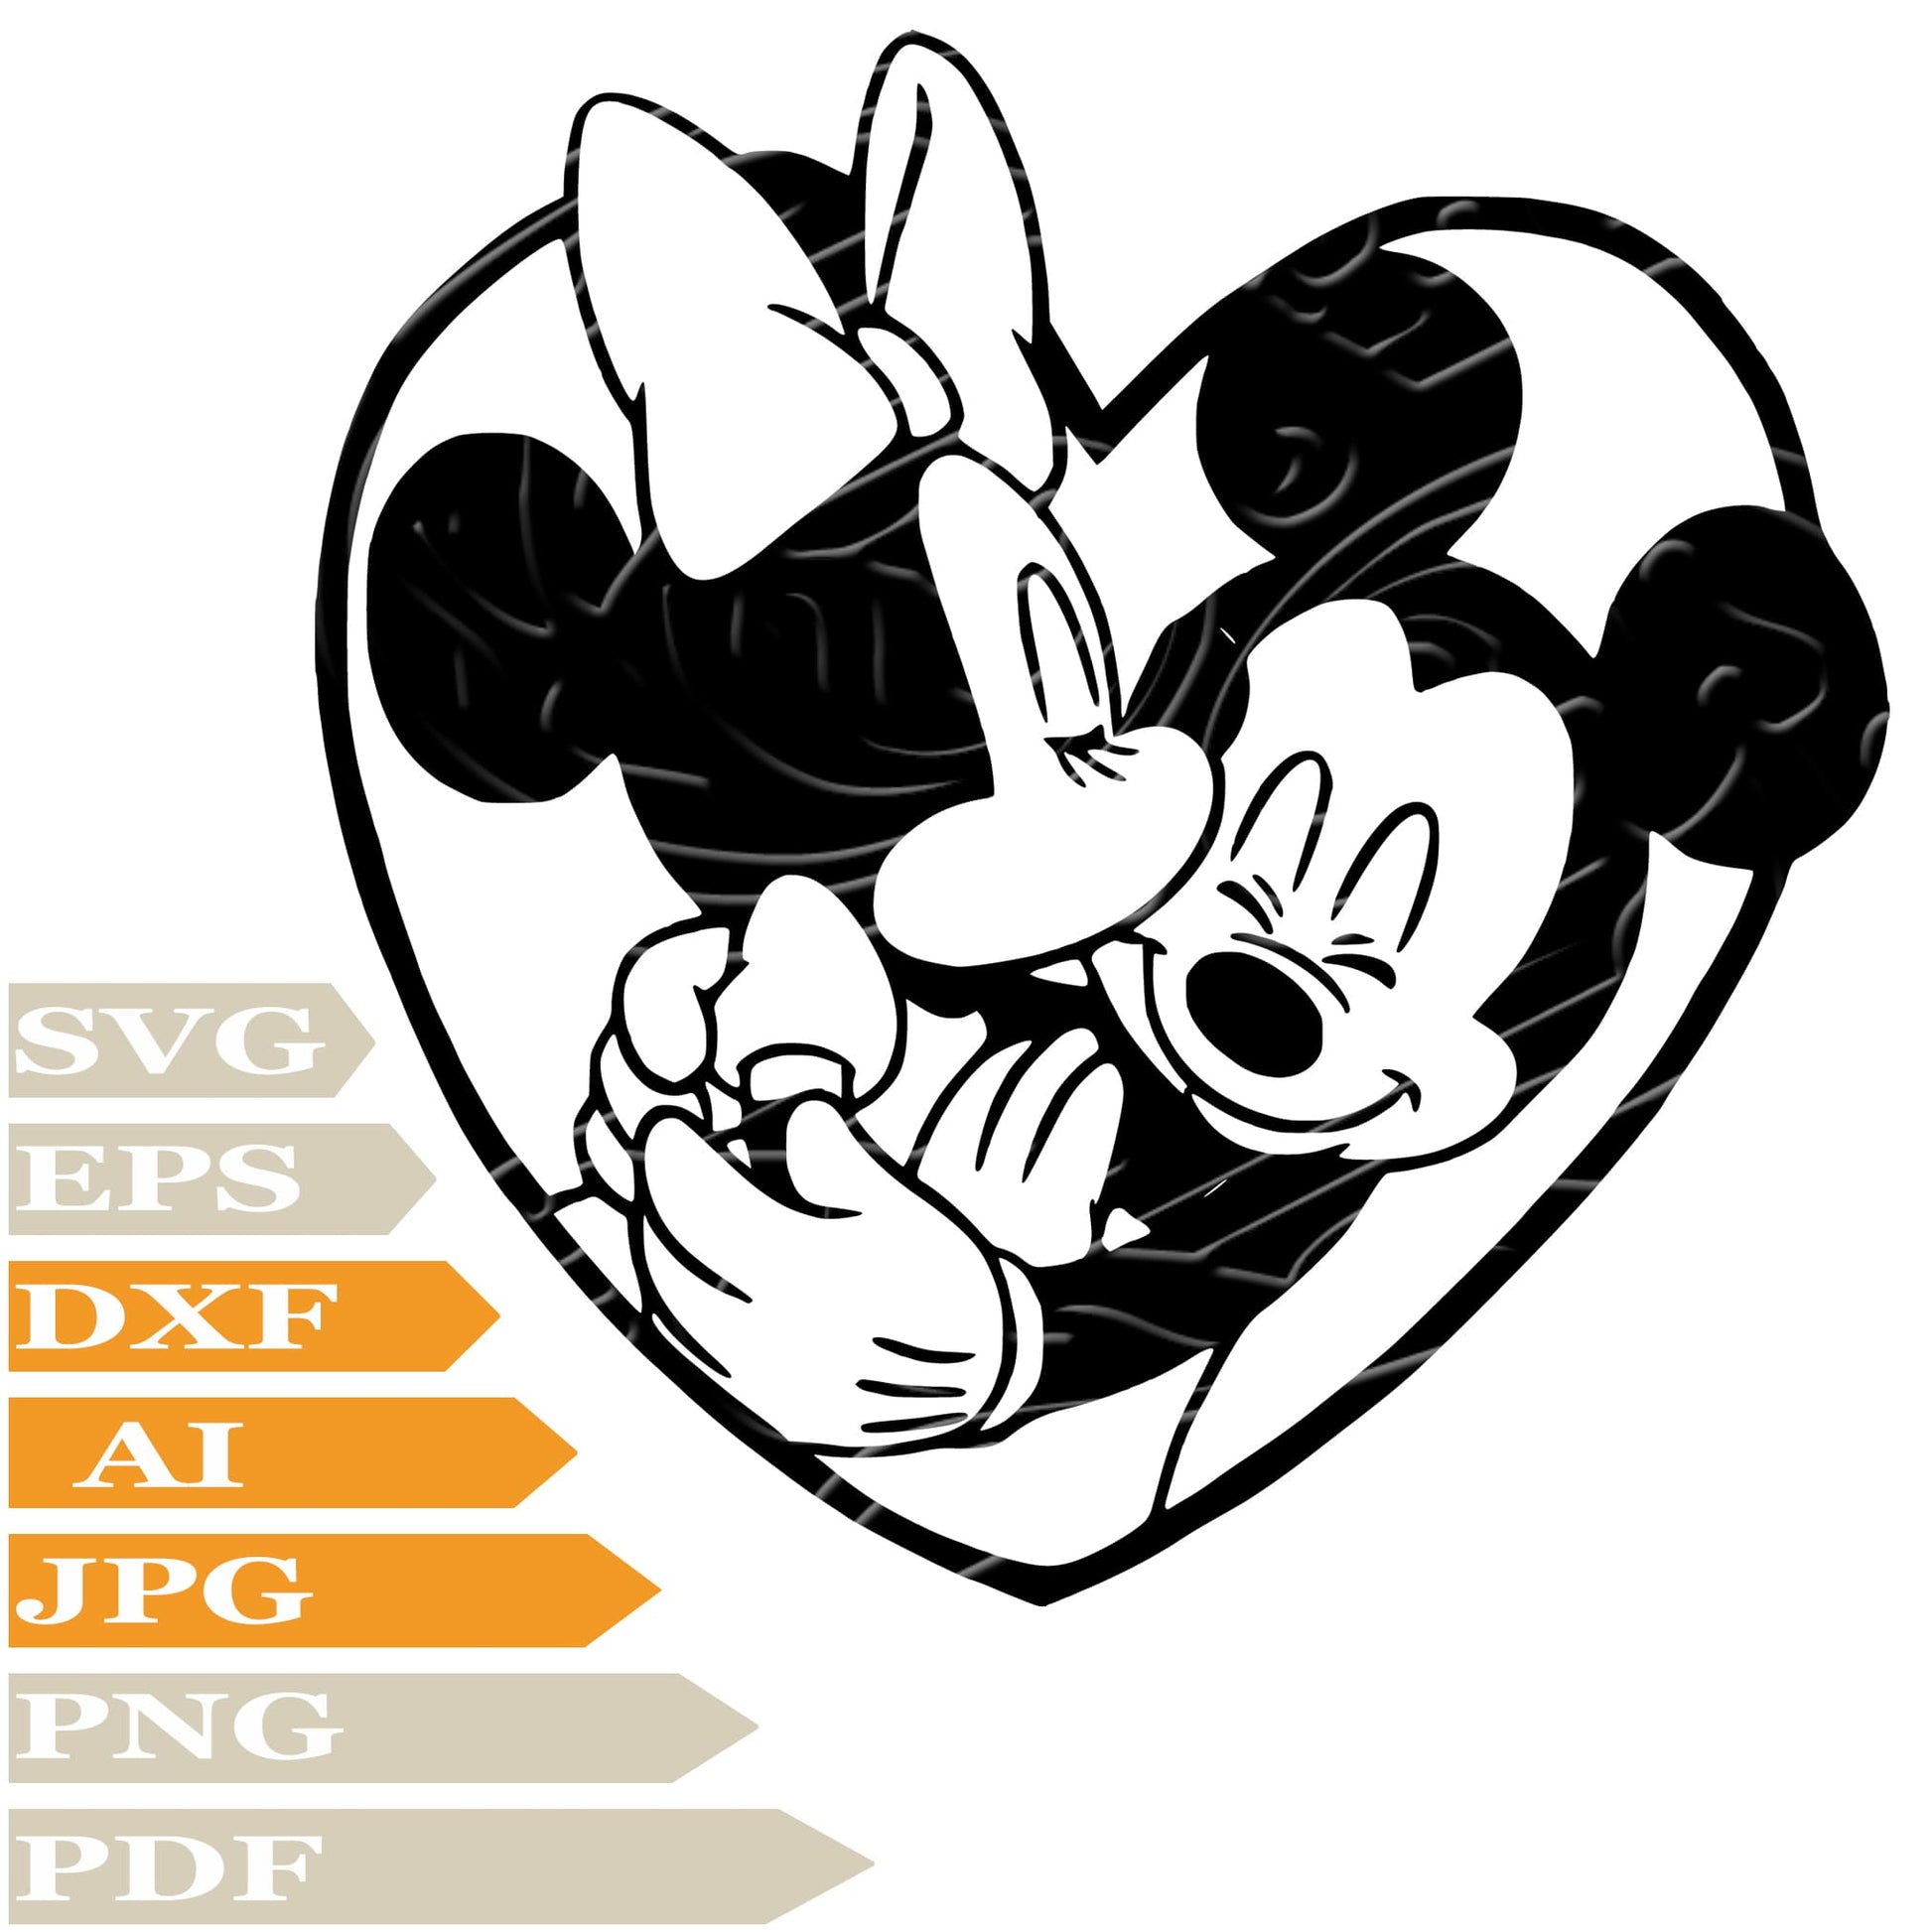 Minnie Mickey Mause, Minnie Mickey in Heart Svg File, Image Cut, Png, For Tattoo, Silhouette, Digital Vector Download, Cut File, Clipart, For Cricut